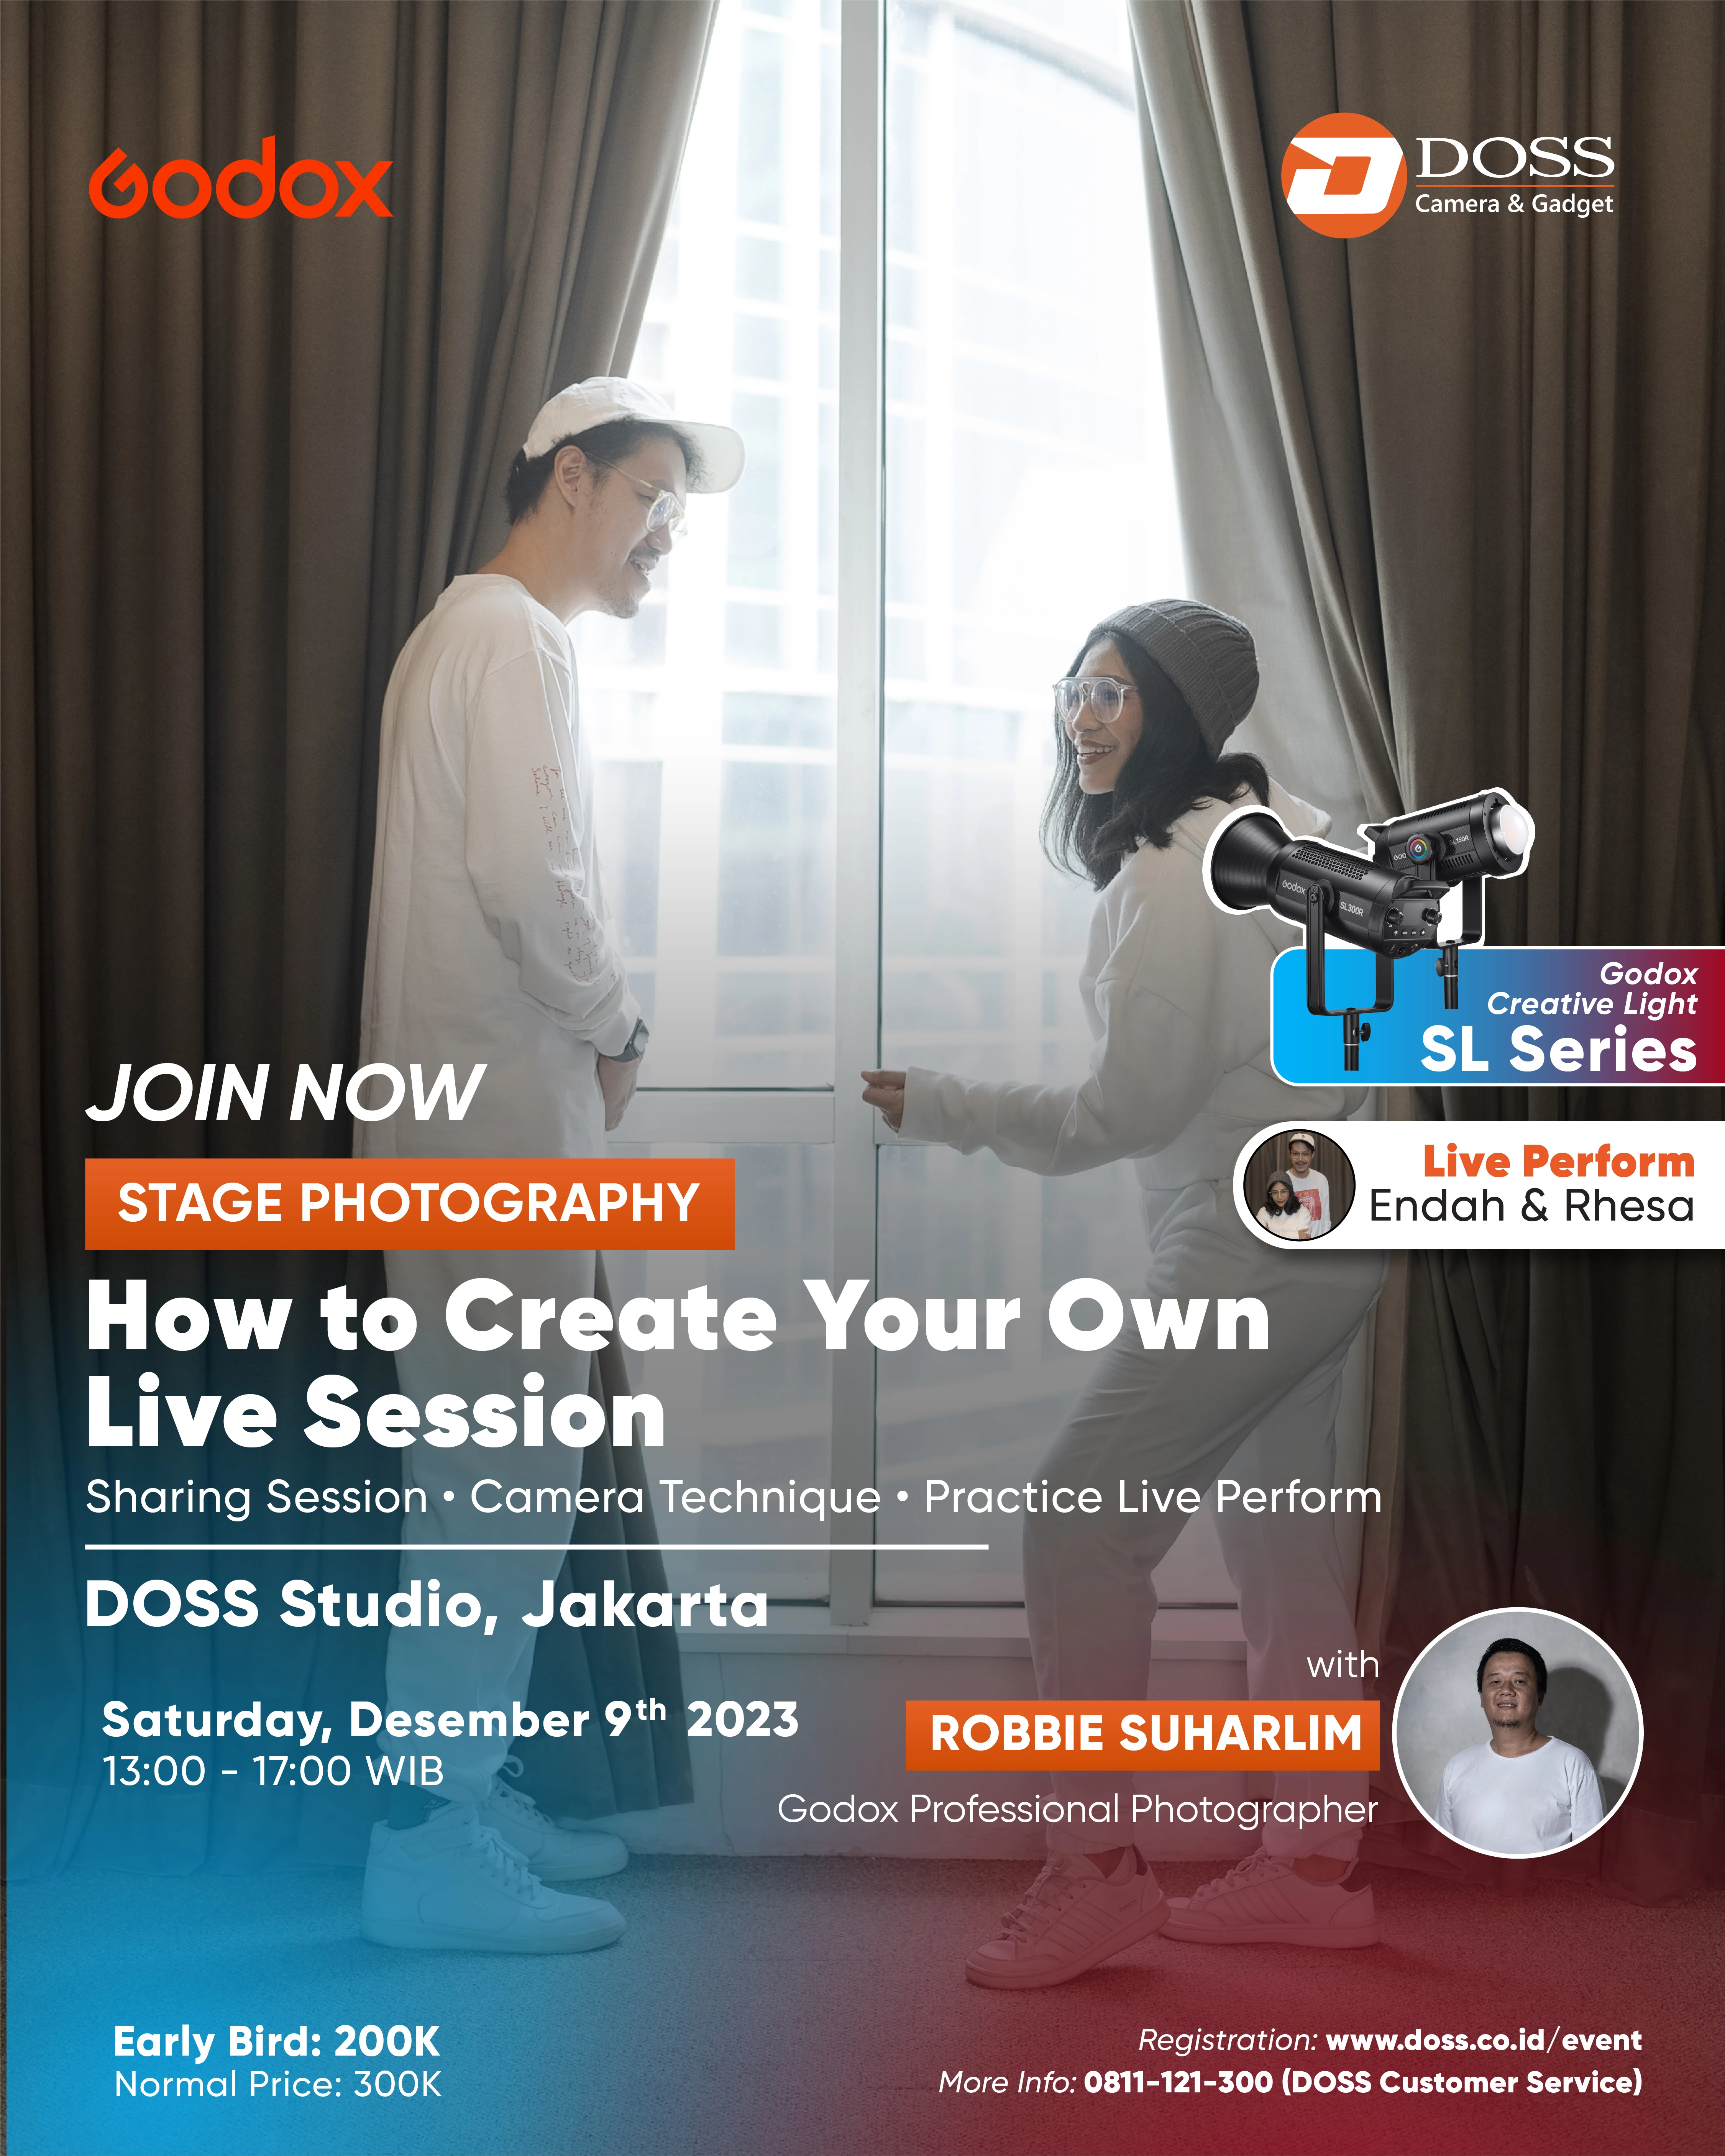 Robbie Suharlim (Godox Professional Photographer) - How to Create Your Own Live Session